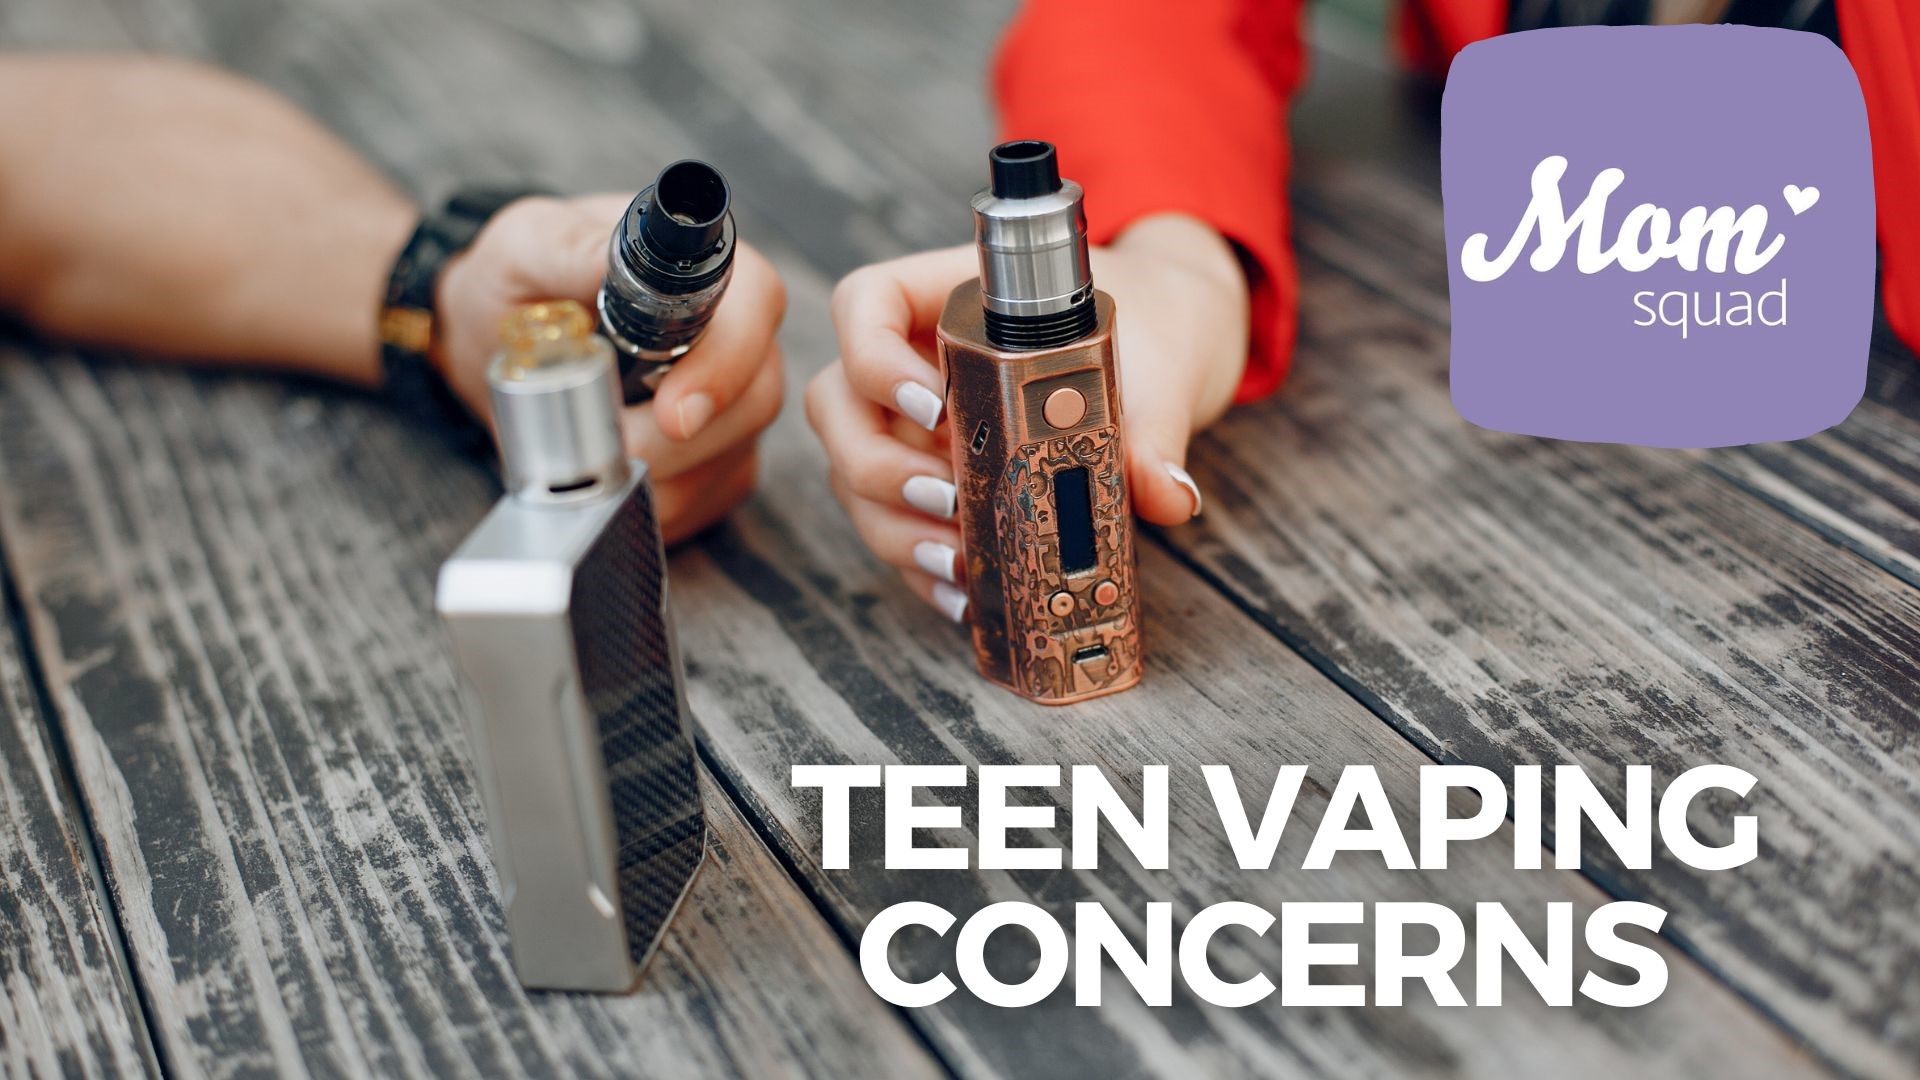 Maureen Kyle talks with a doctor about the health impacts of vaping and e-cigarettes on teenagers. Plus, what parents need to know and tips to talk with your teen.